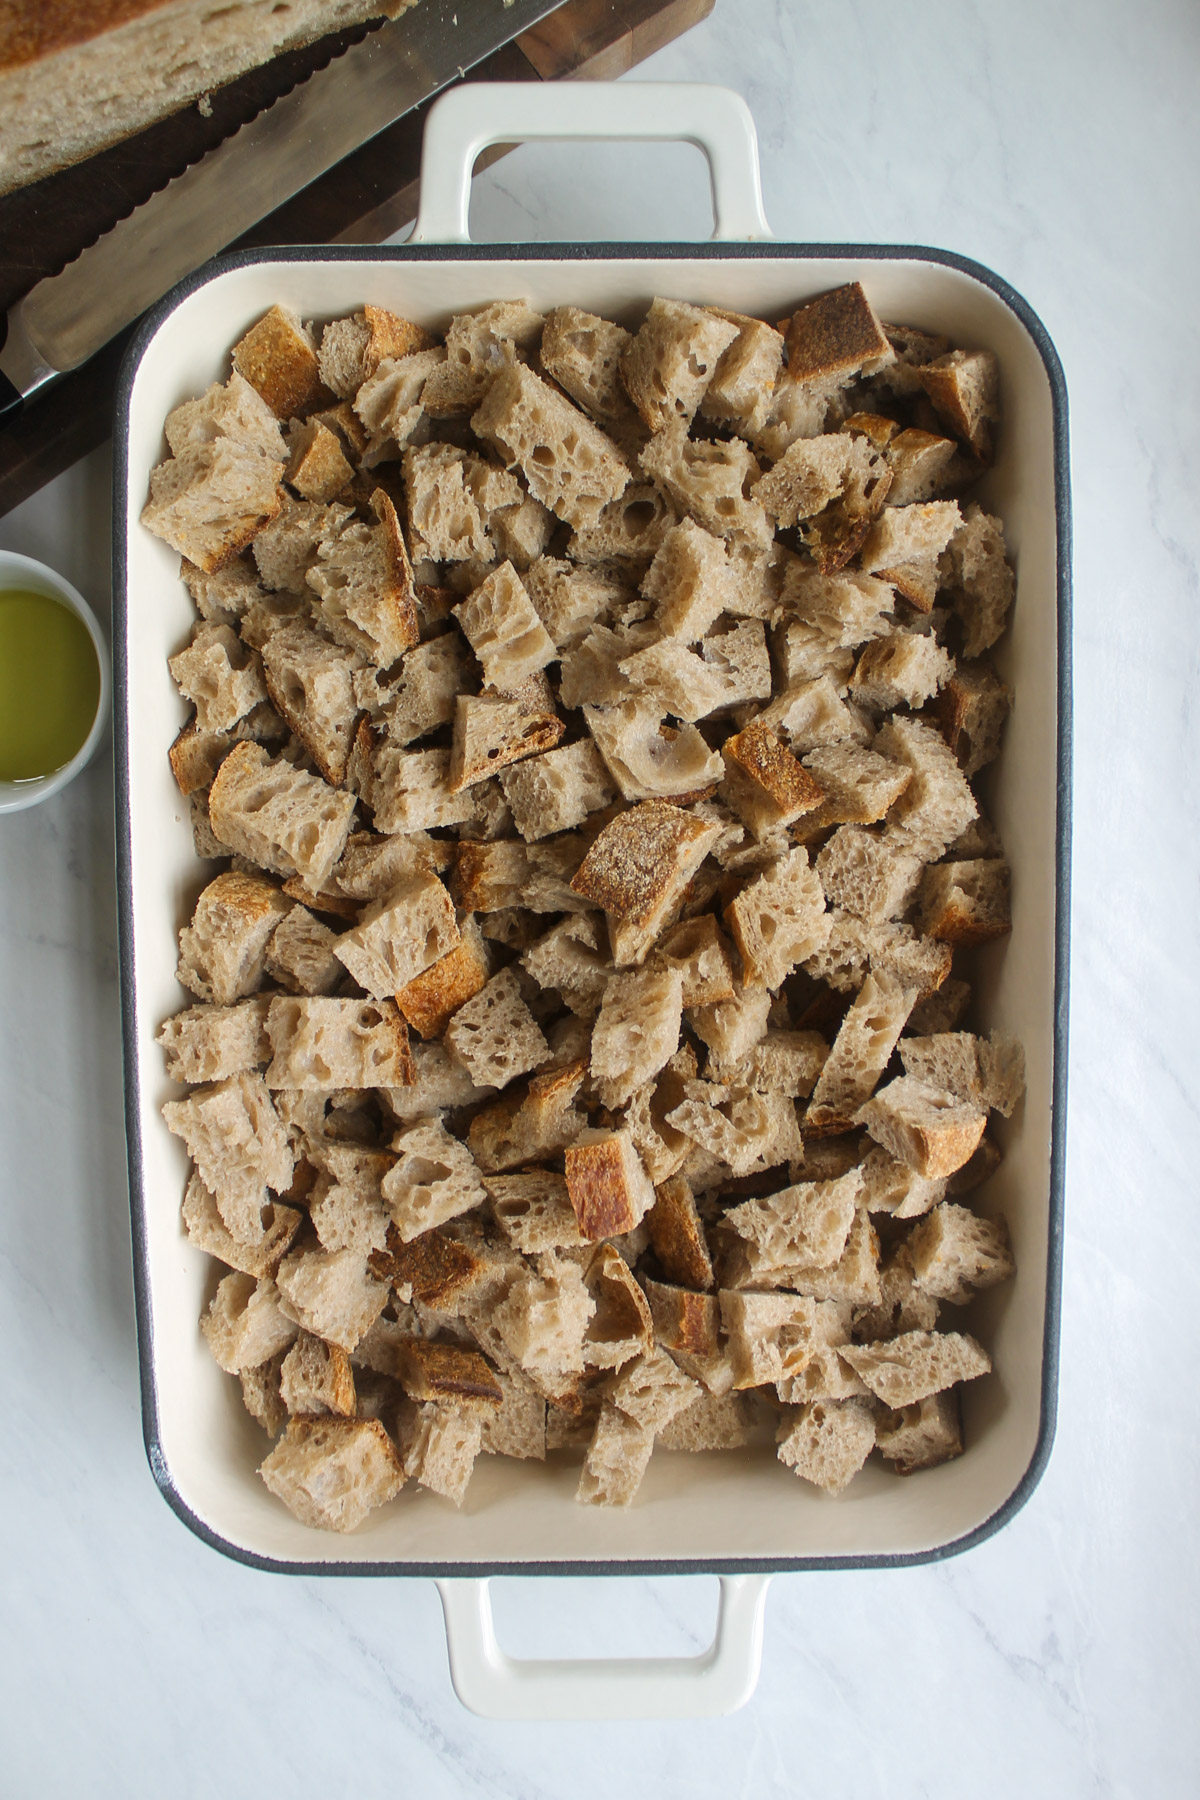 A white baking dish full of cubed wheat crusty bread.